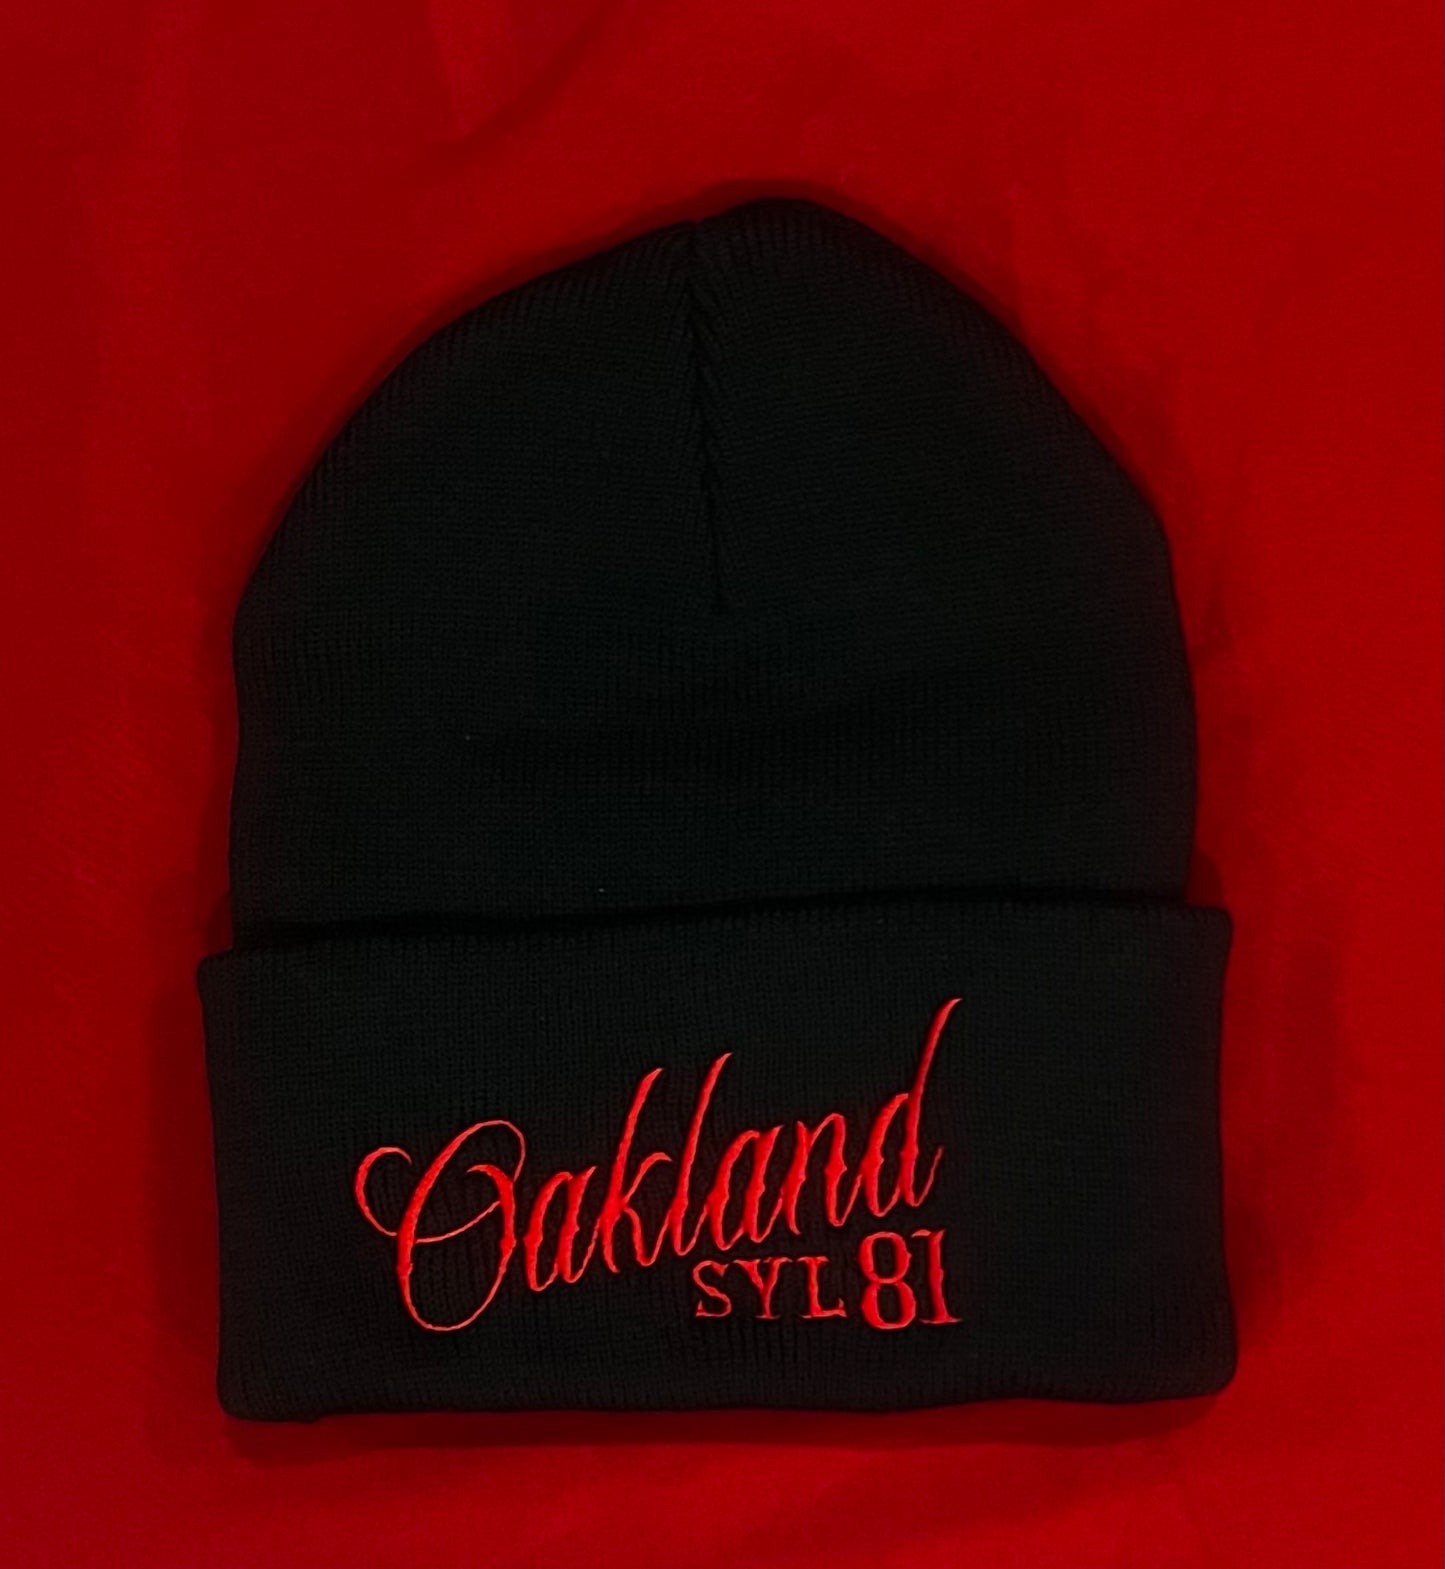 2 COLORS AVAILABLE-OAKLAND SYL 81 BEANIE